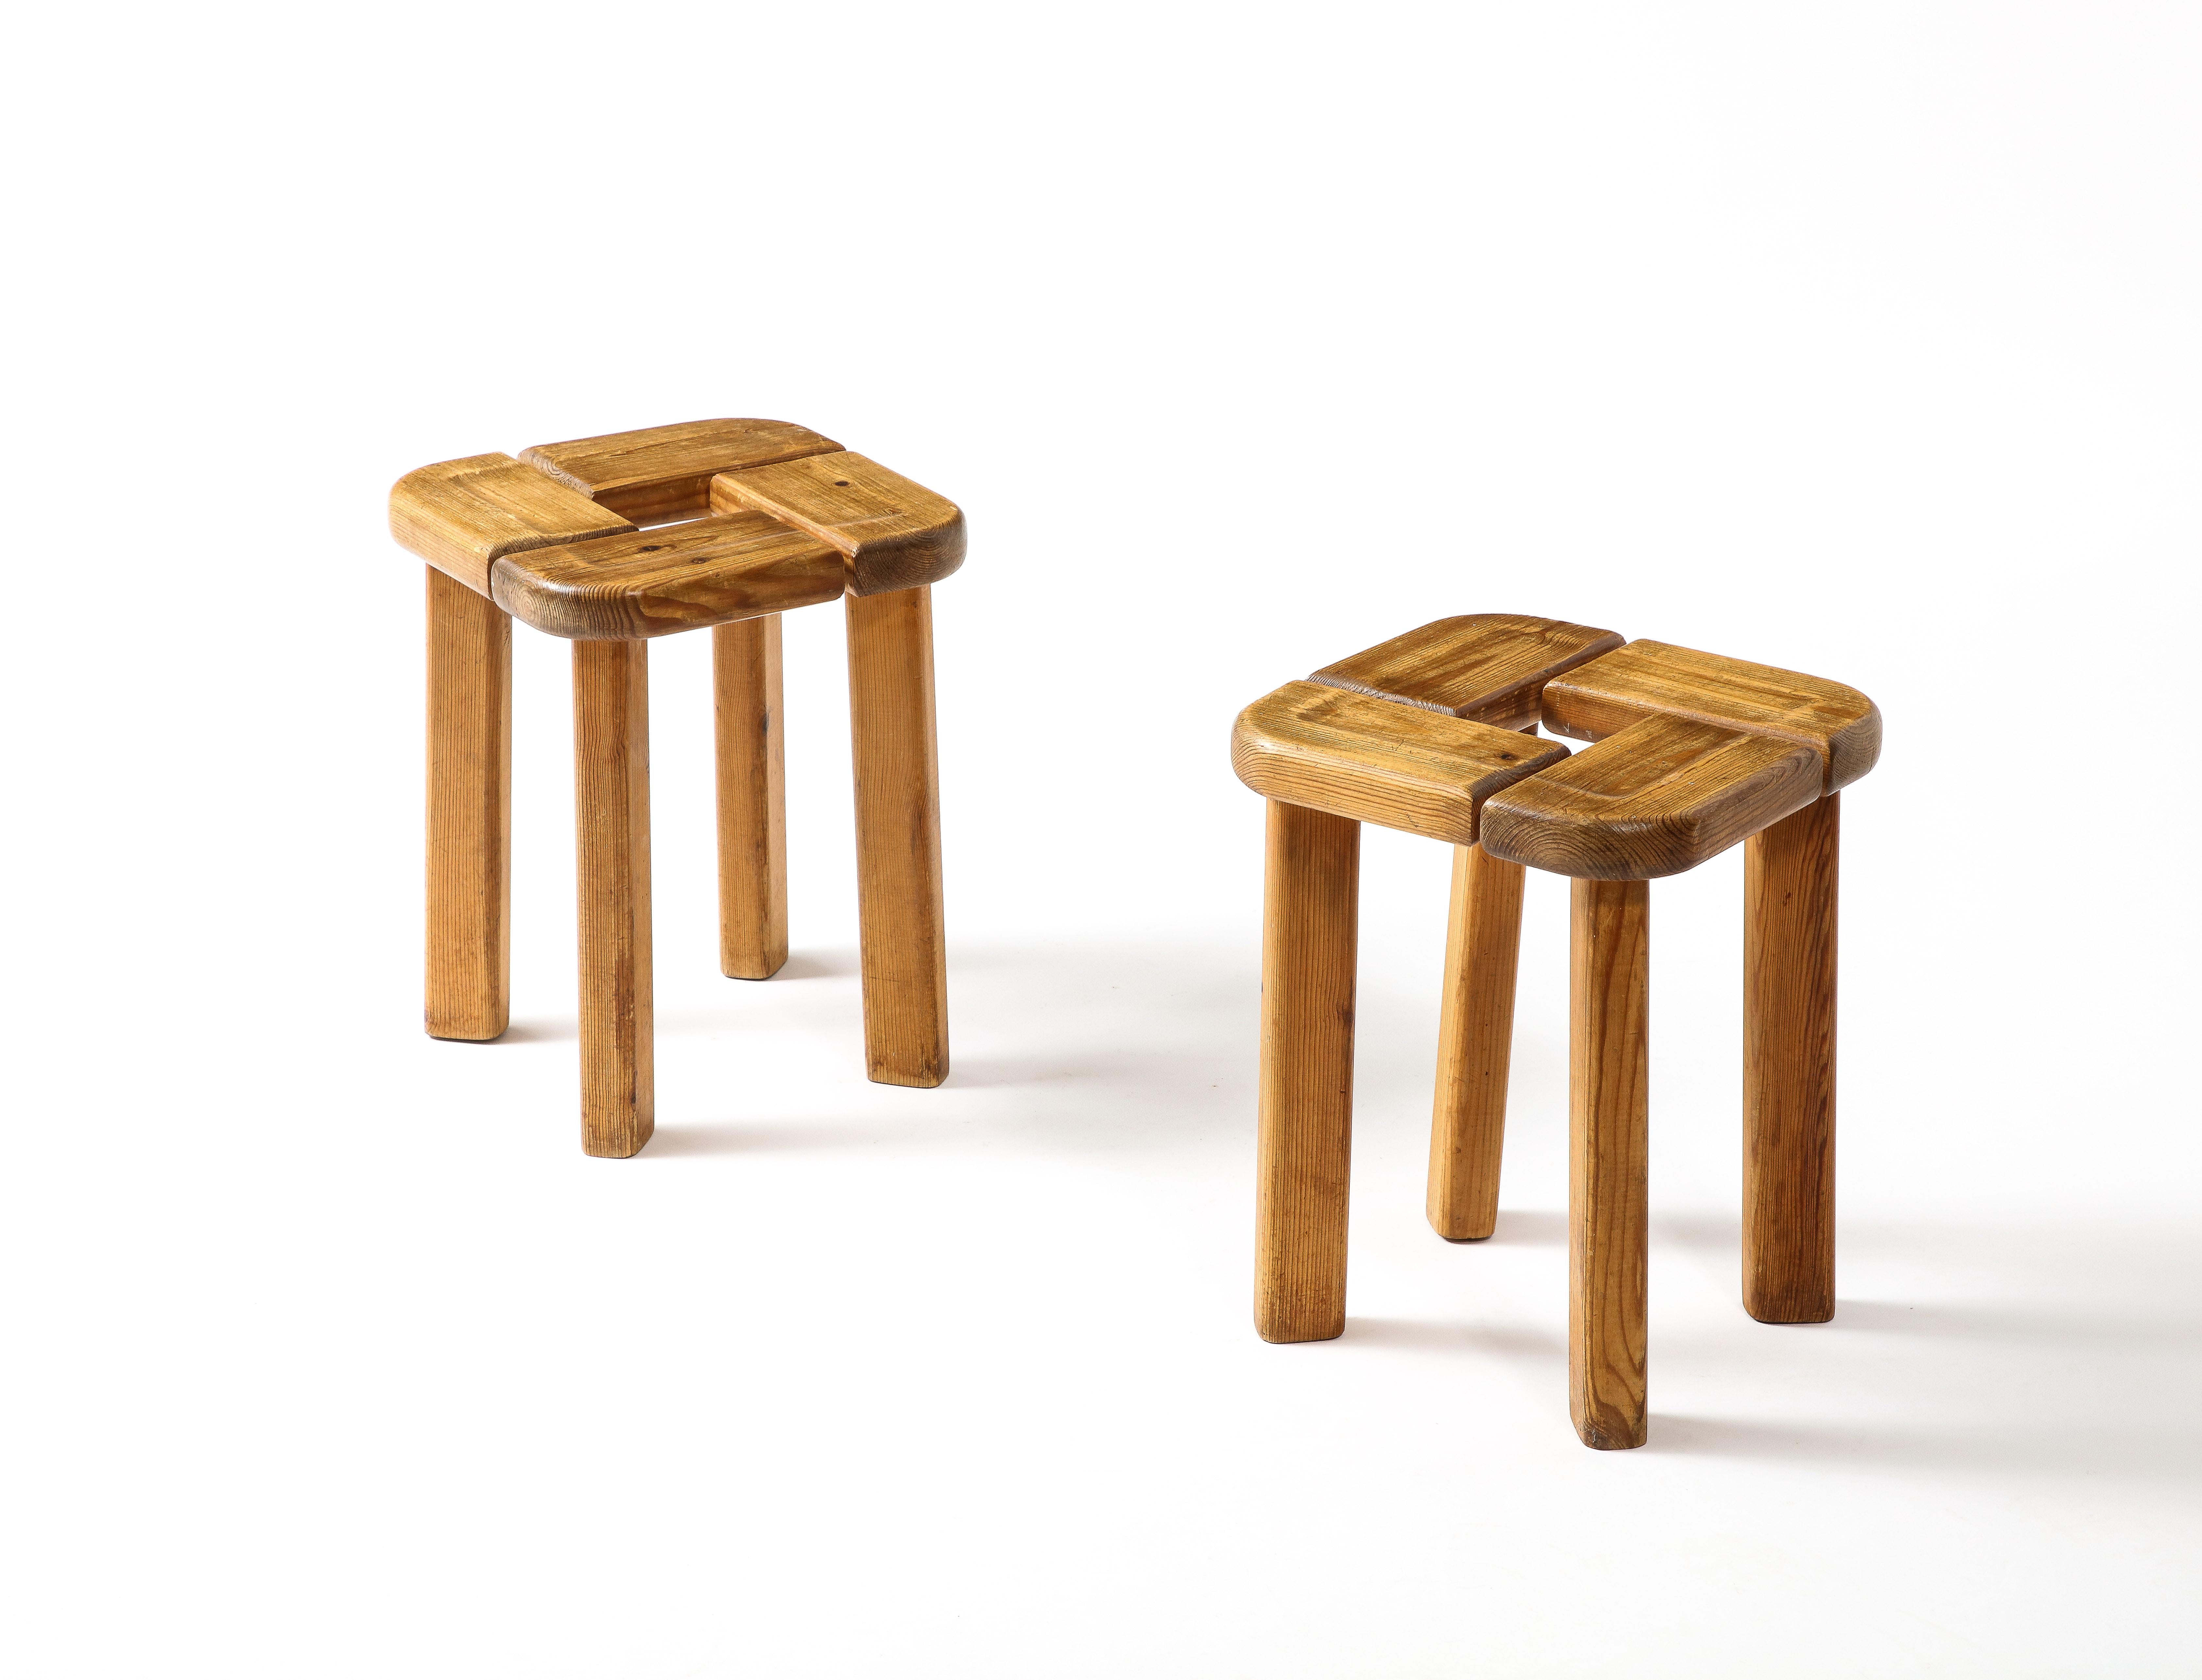 20th Century Pine Stools by Olof Ottelin, Sweden 1960s For Sale